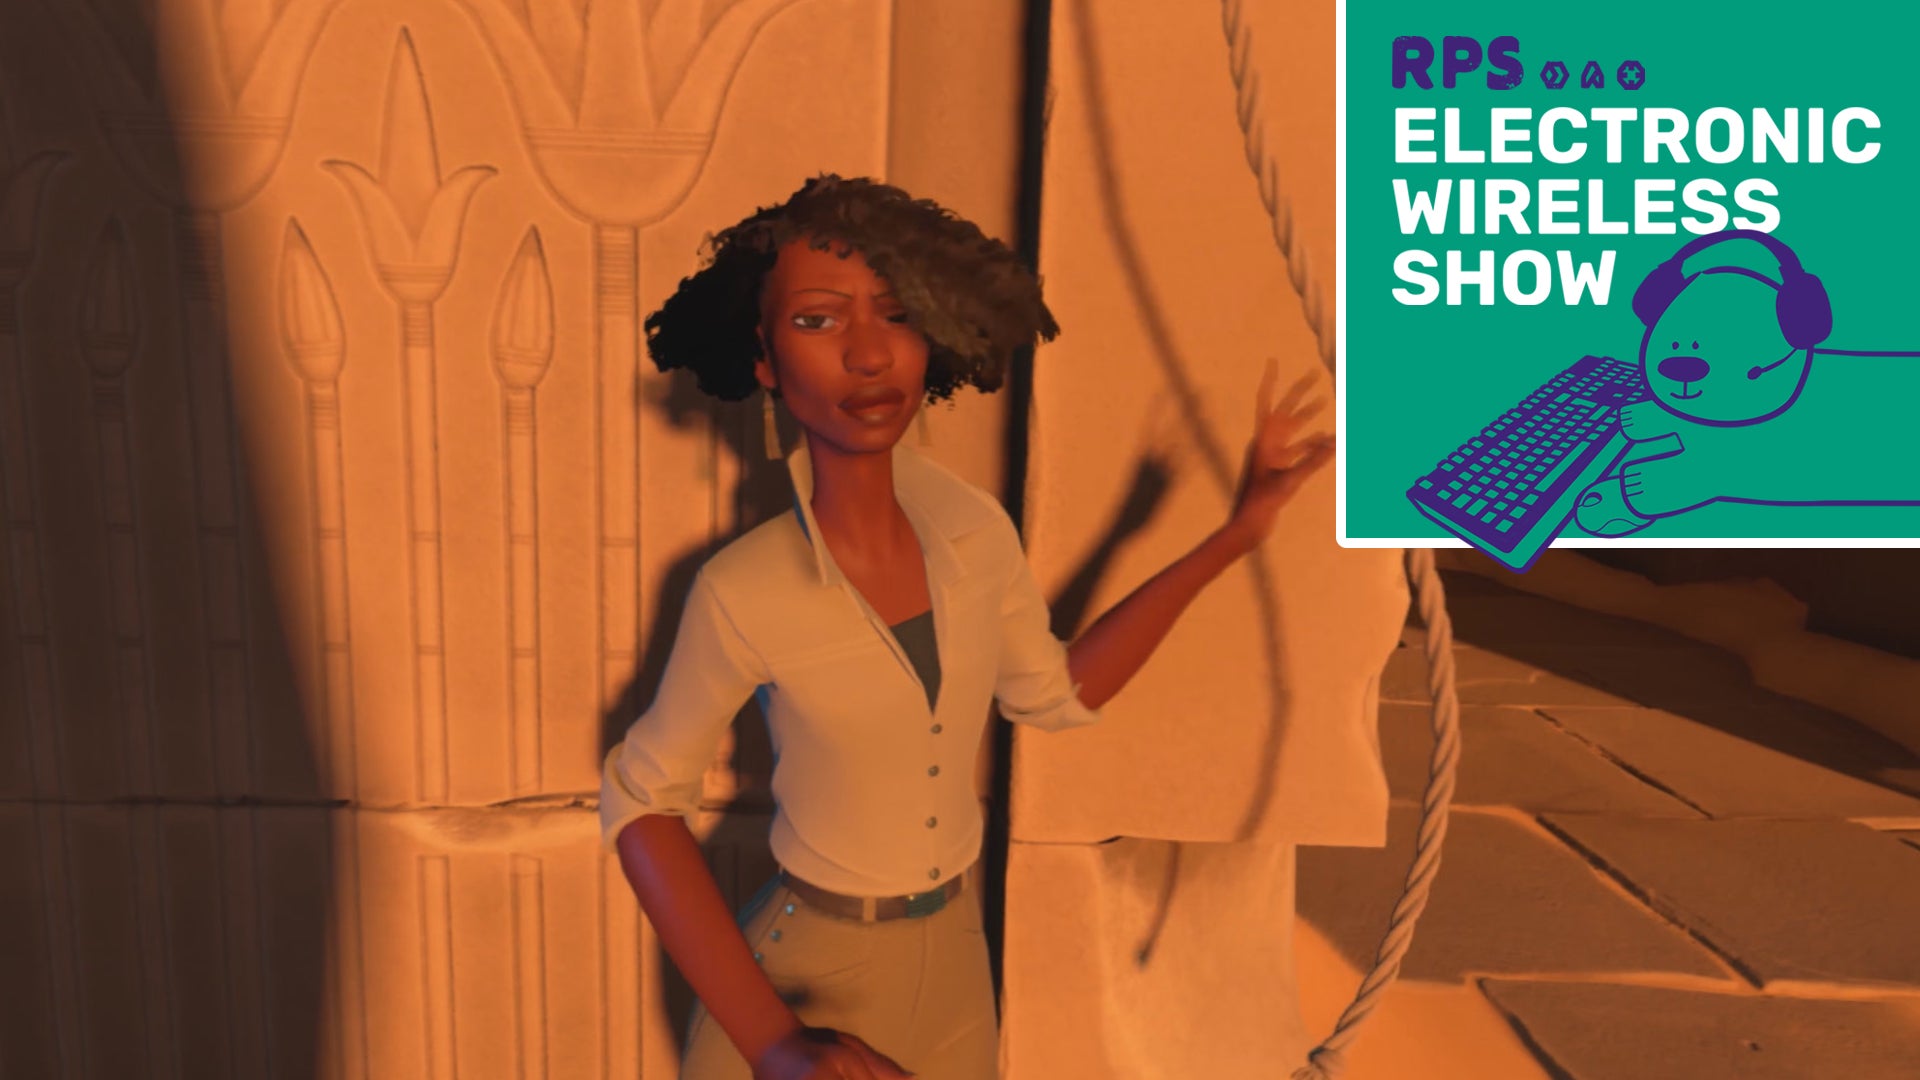 A screen from In The Valley Of Gods showing a black woman with a short bob and wearing a khaki shirt and trousers, standing at golden hour in front of part of a stone ruin. The green Electronic Wireless Show Podcast logo is superimposed over the top right corner